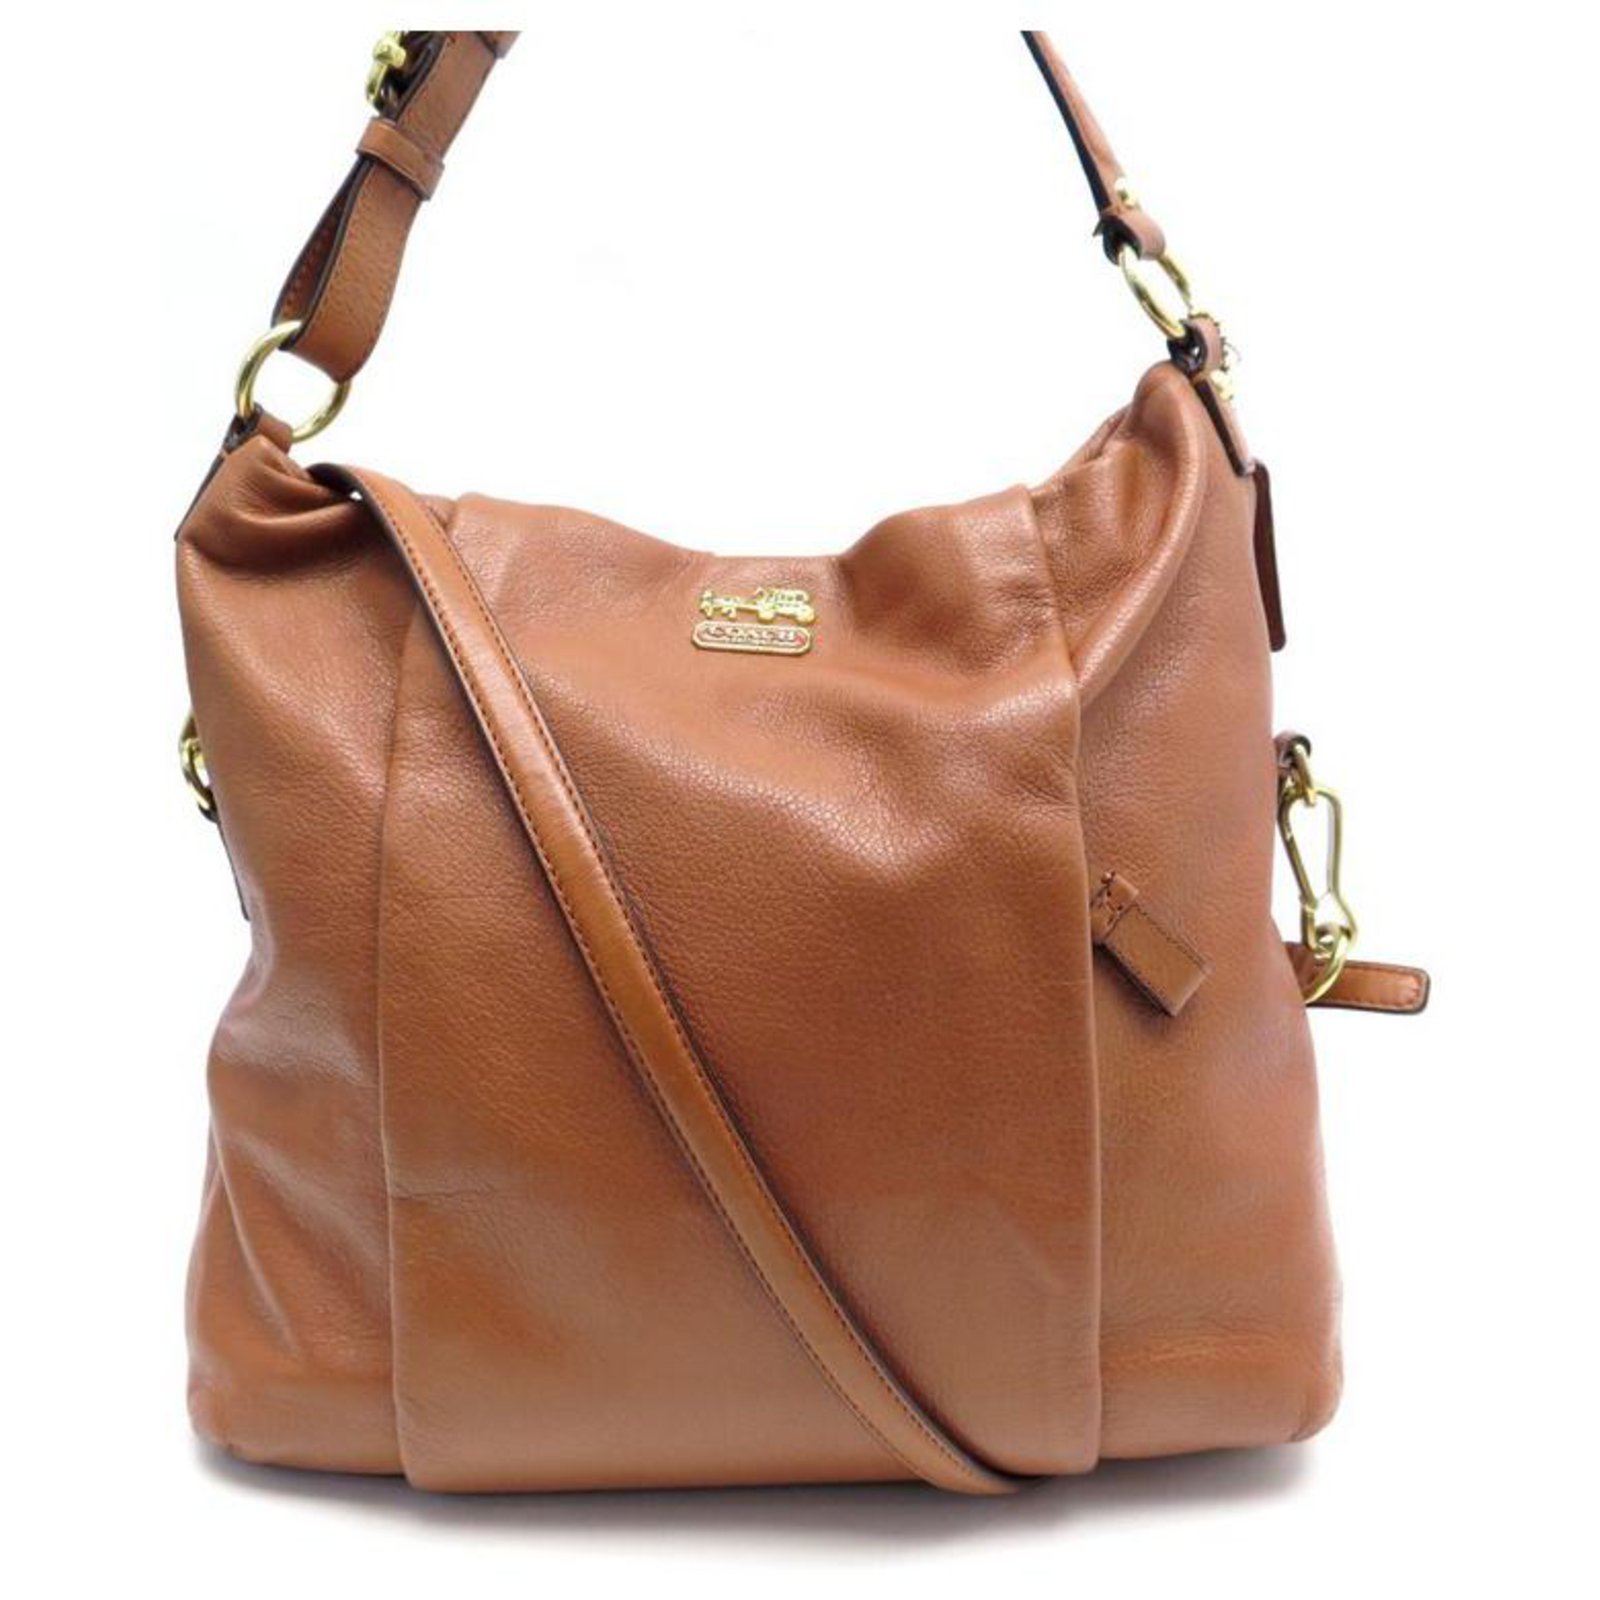 Coach brown leather bucket bag purse | Purses and bags, Bags, Bucket bag